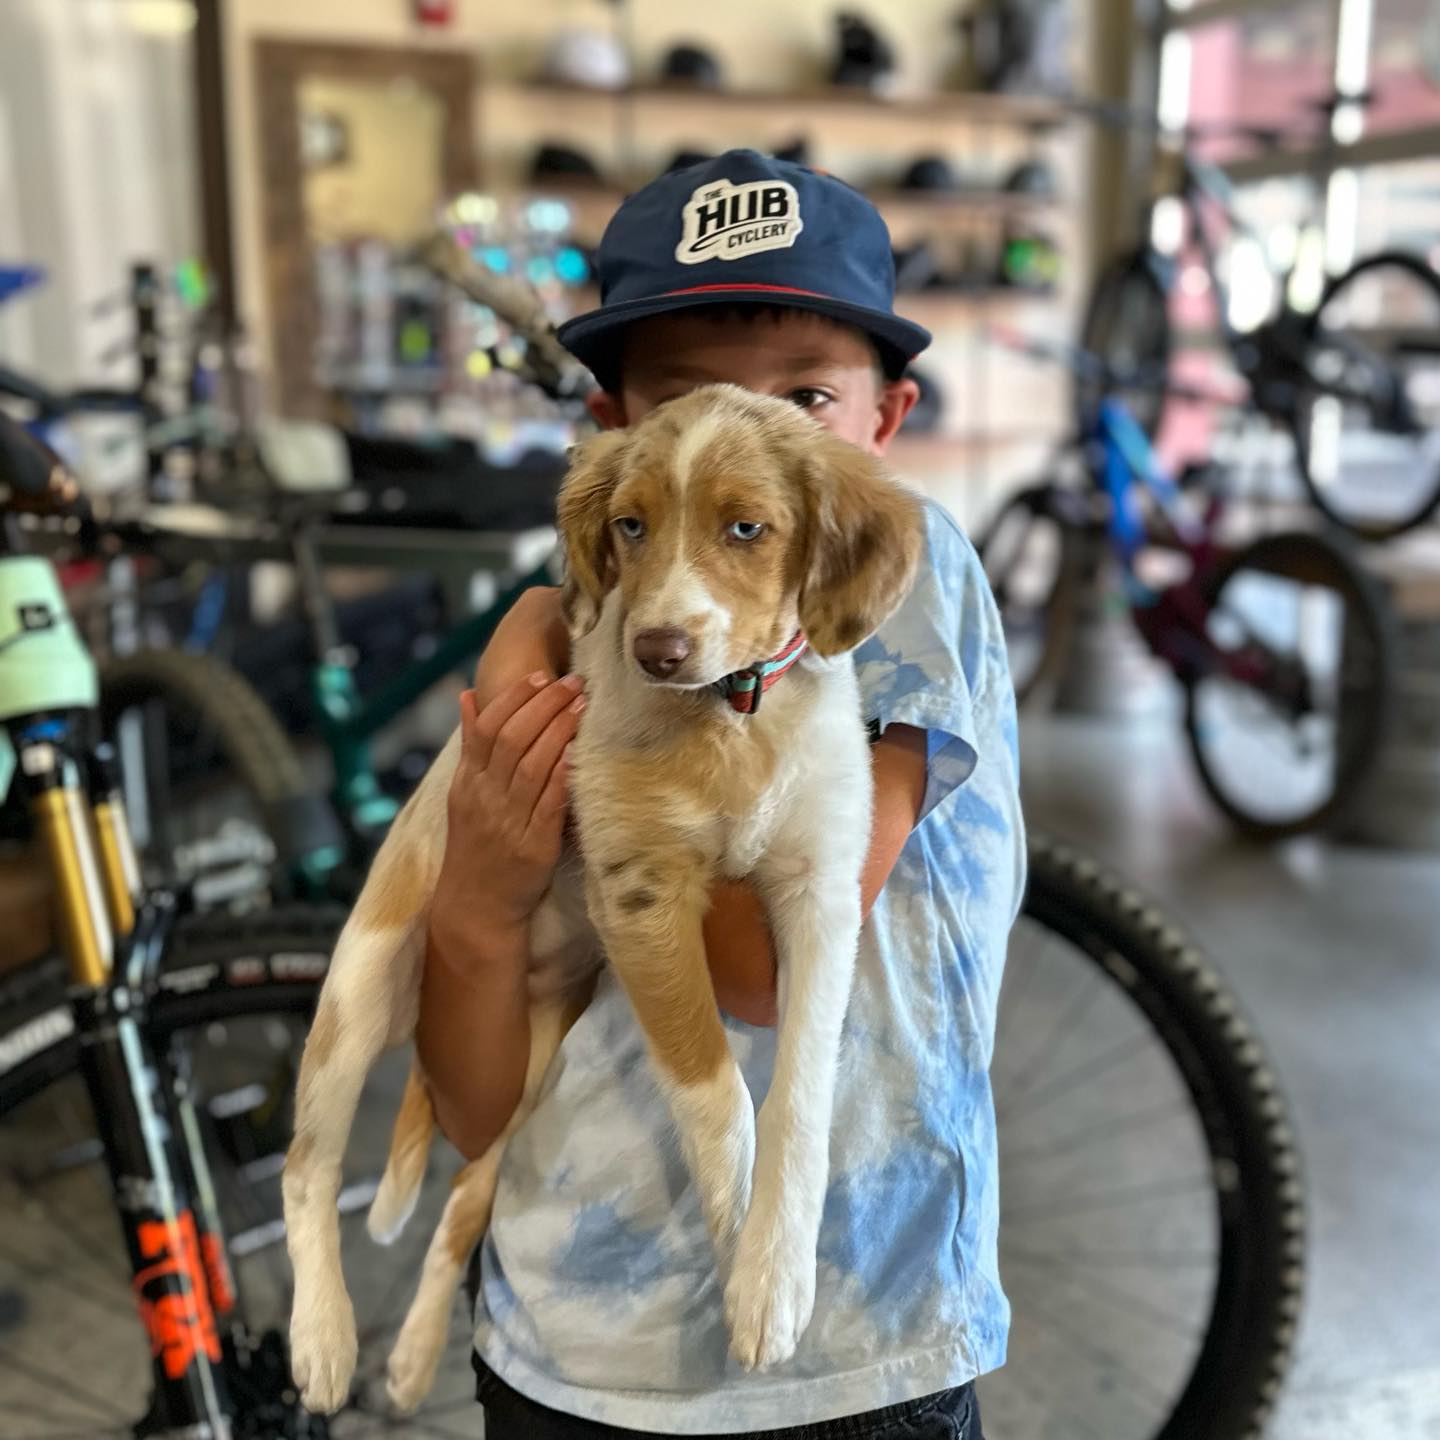 henry and dog ruby at the hub cyclery